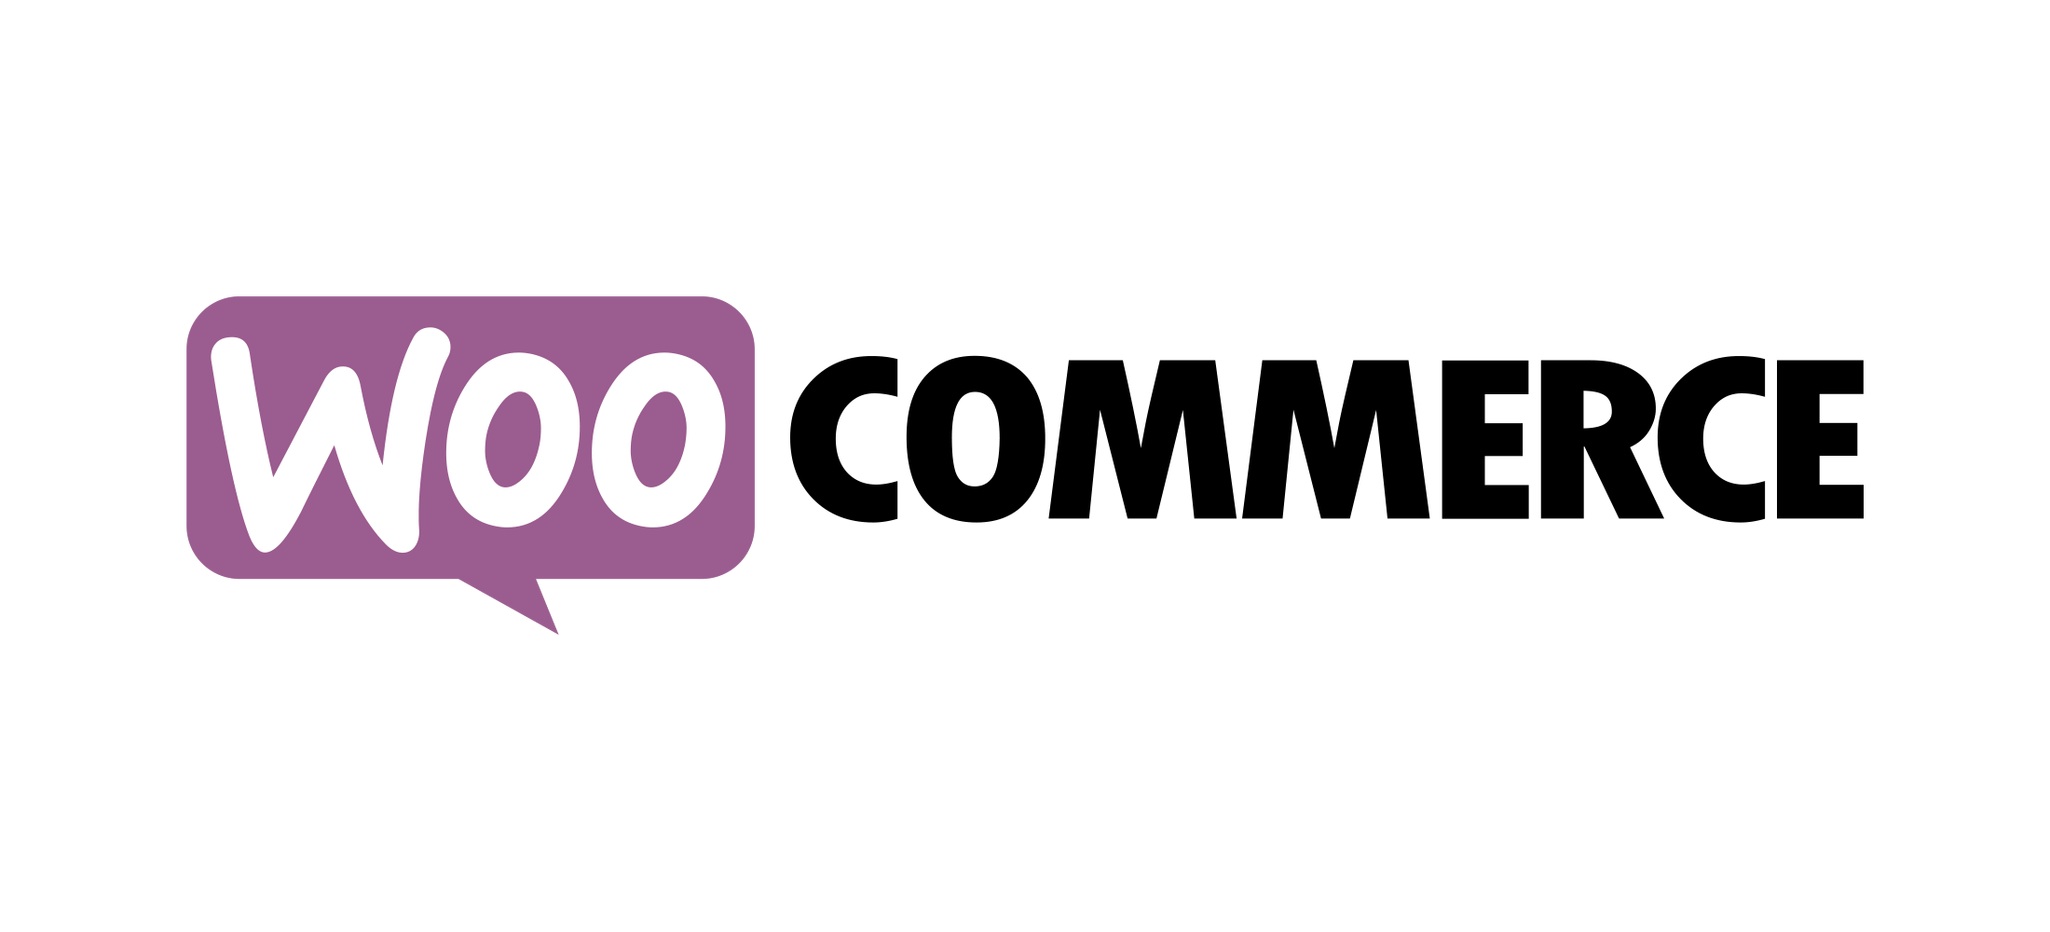 WooCommerce 3.1 Adds New CSV Product Importer/Exporter, Improves Extension Management